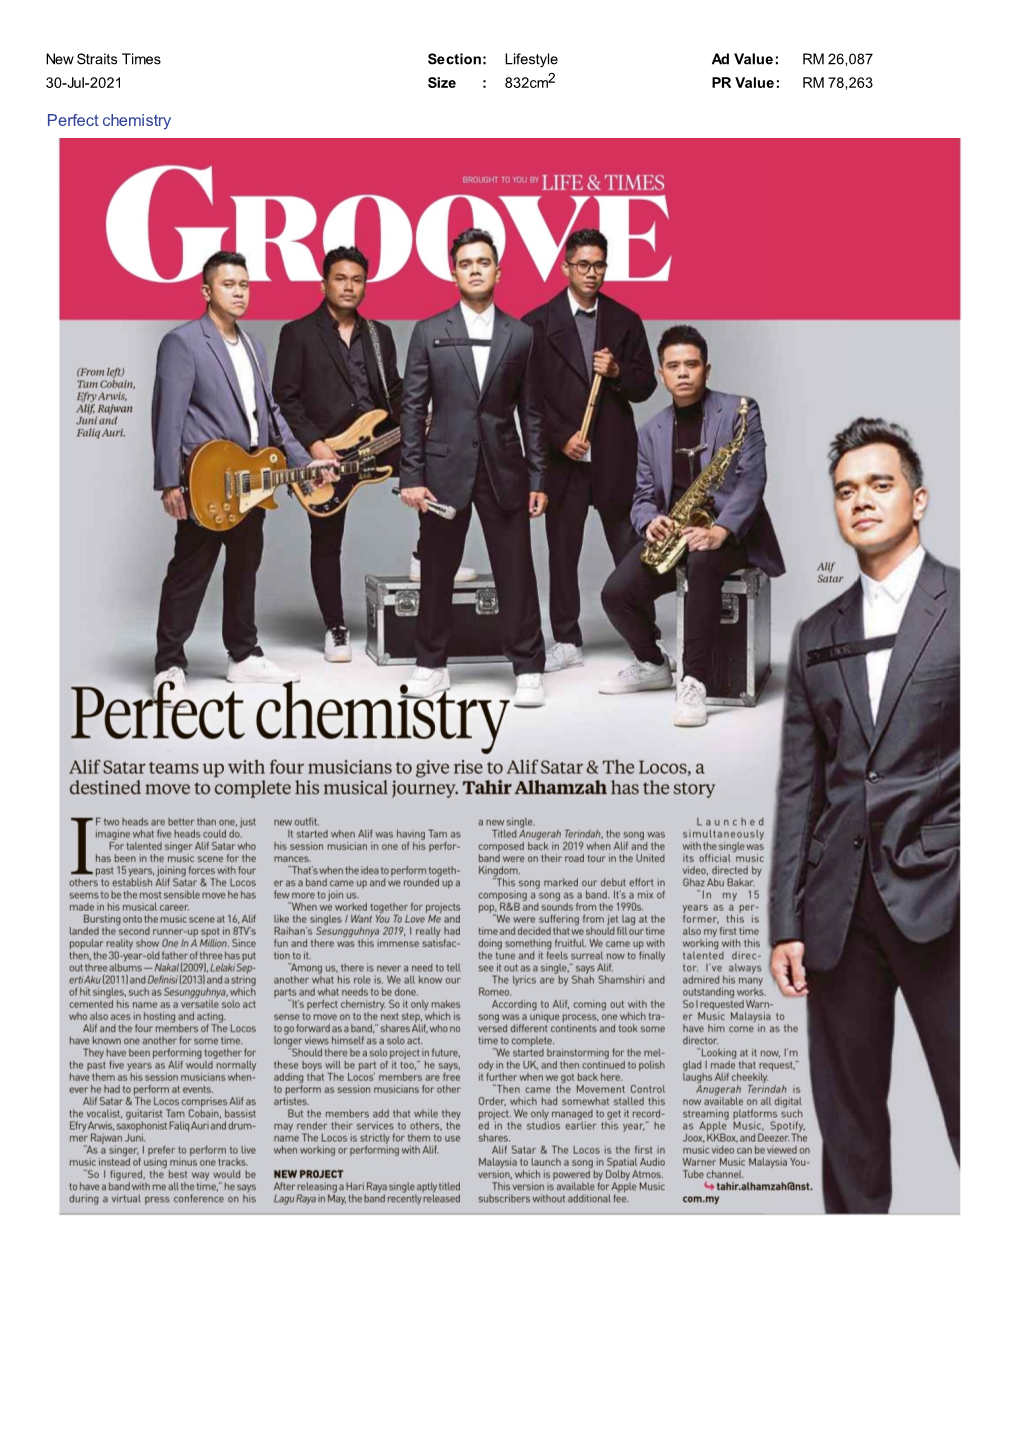 New Straits Times Perfect Chemistry